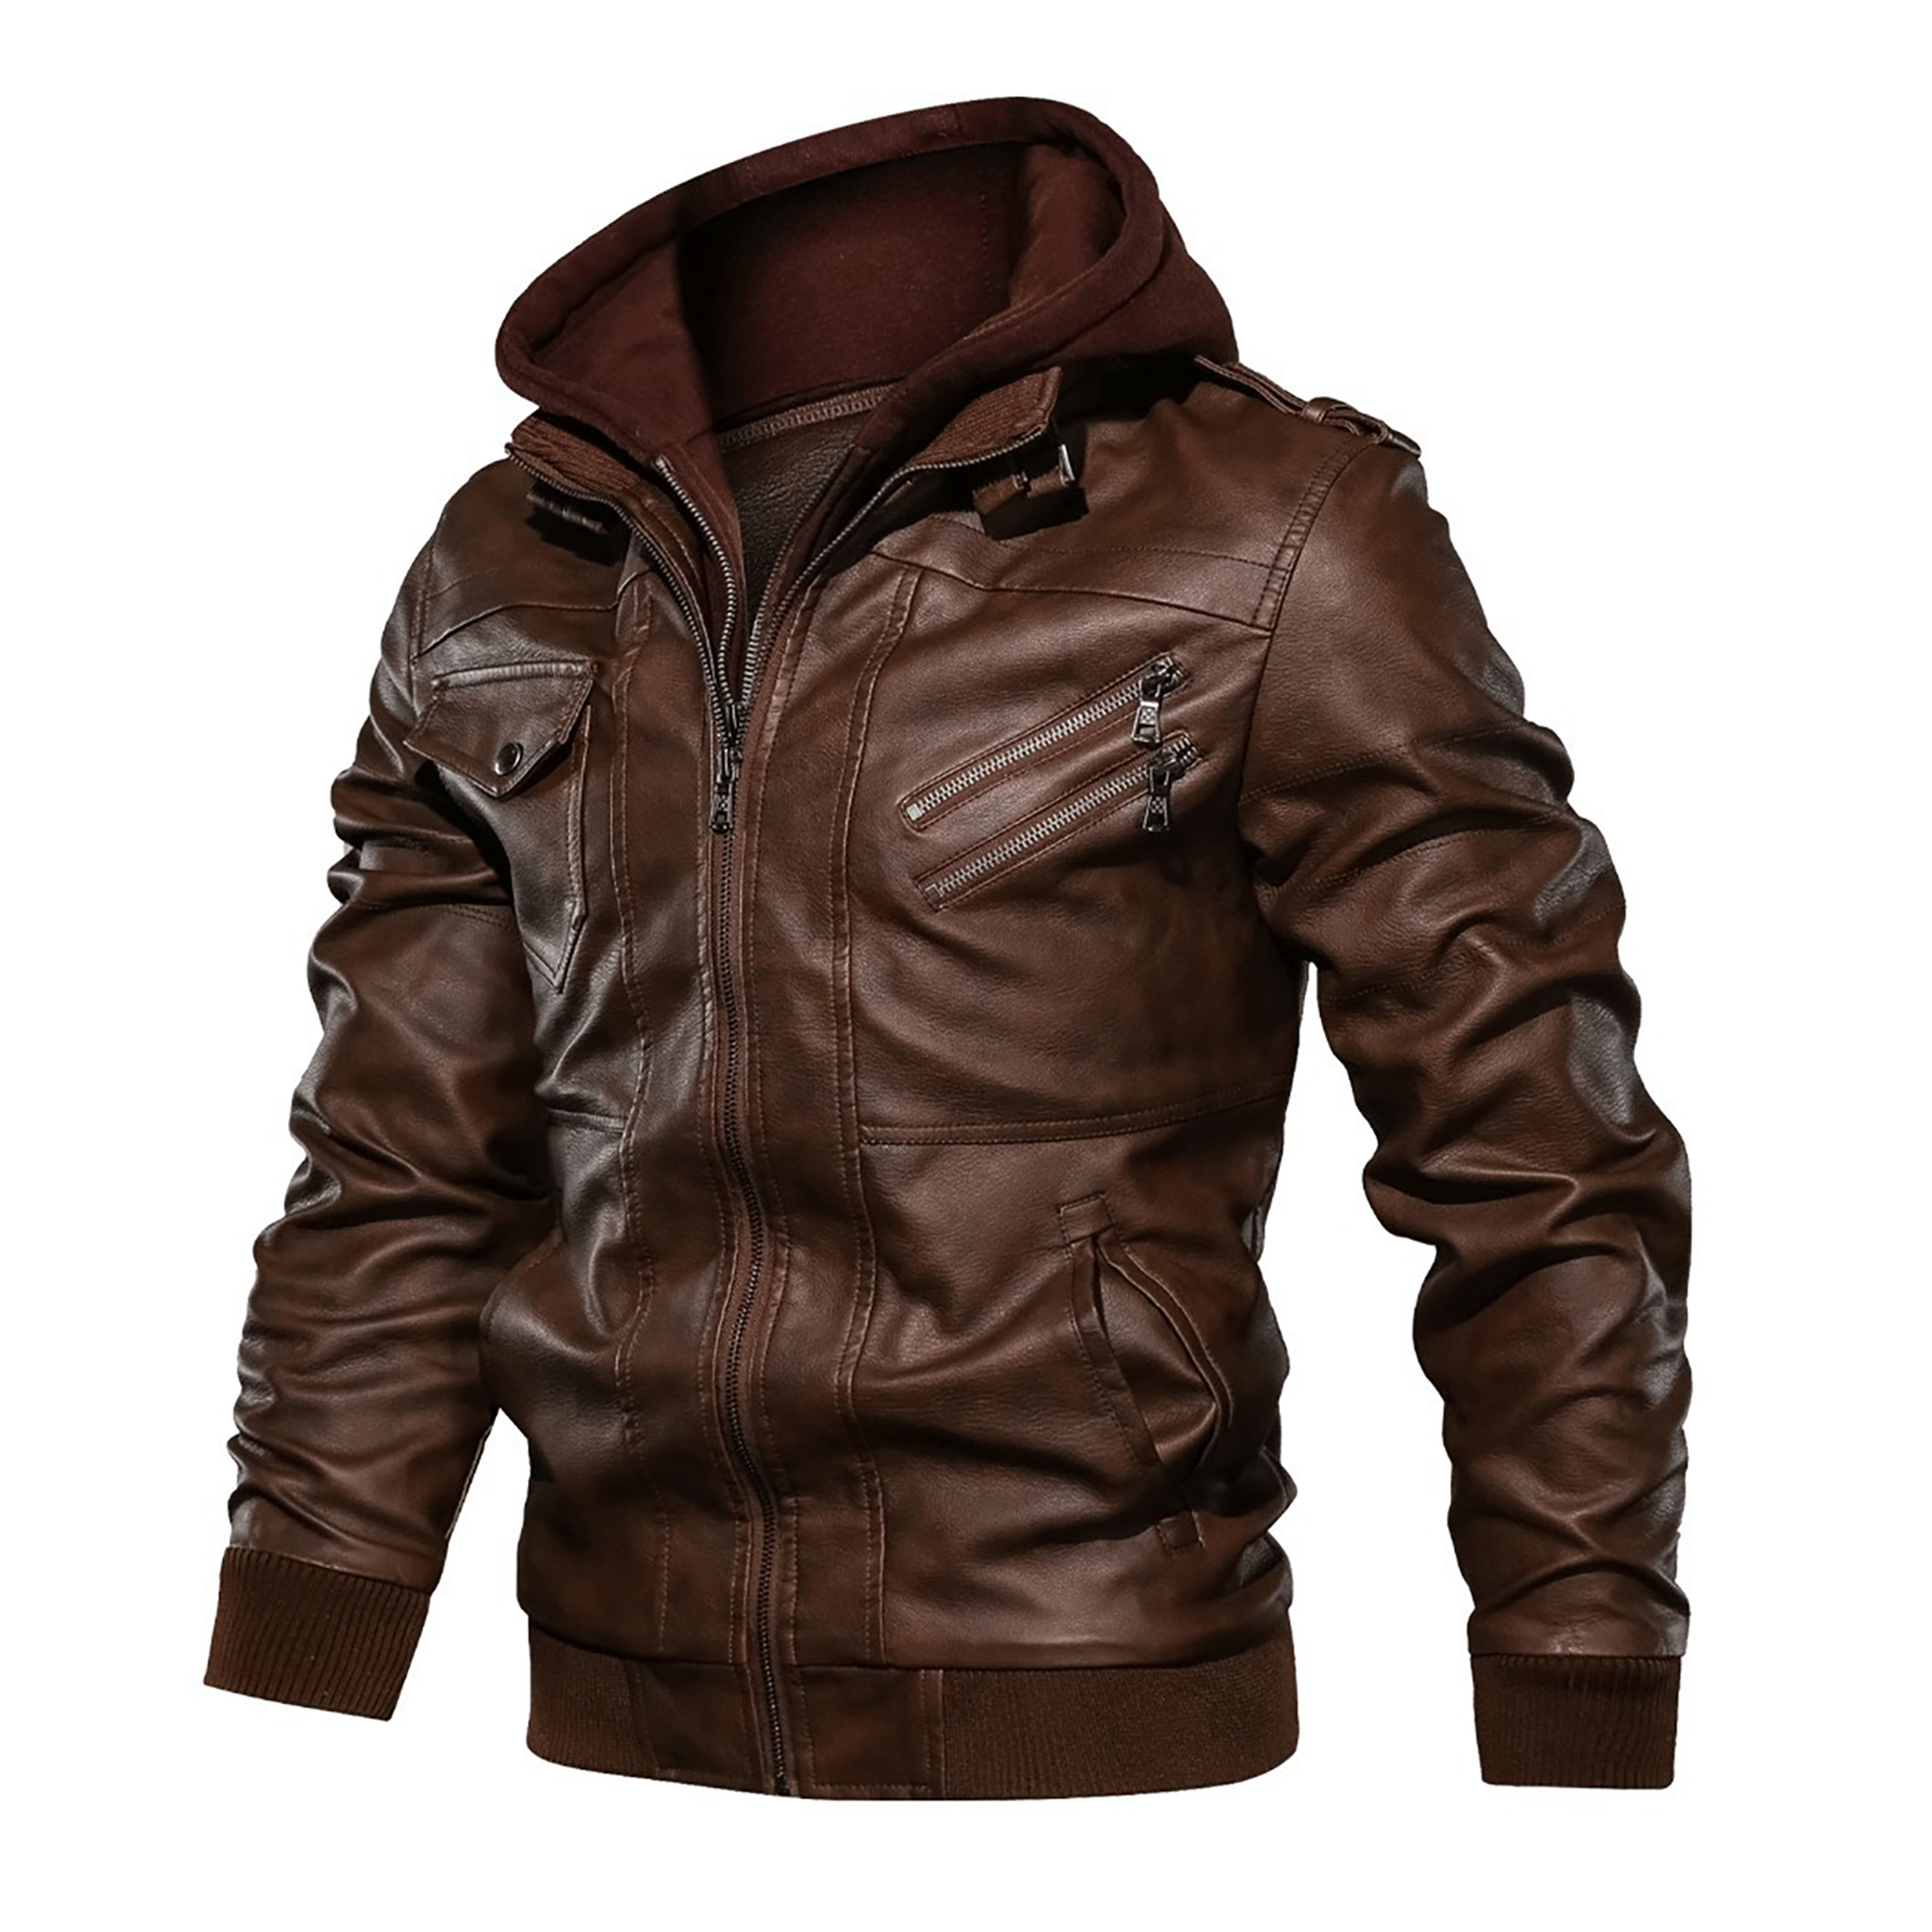 Top leather jackets and latest products 343